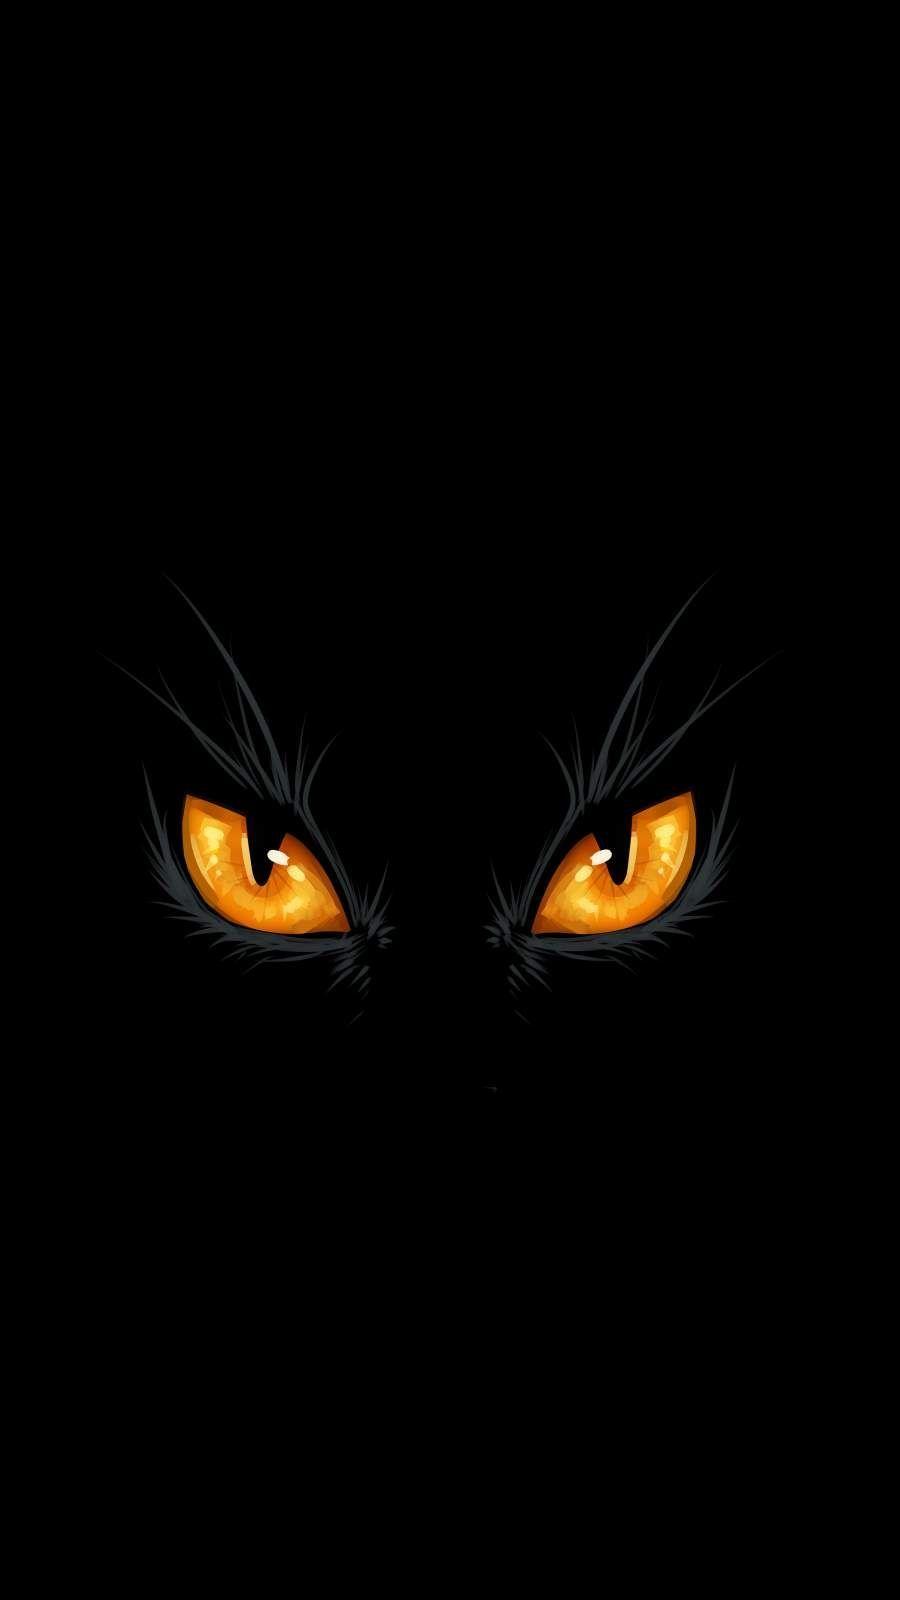 Black Cat Eyes Wallpapers - Top Free Black Cat Eyes Backgrounds - WallpaperAccess